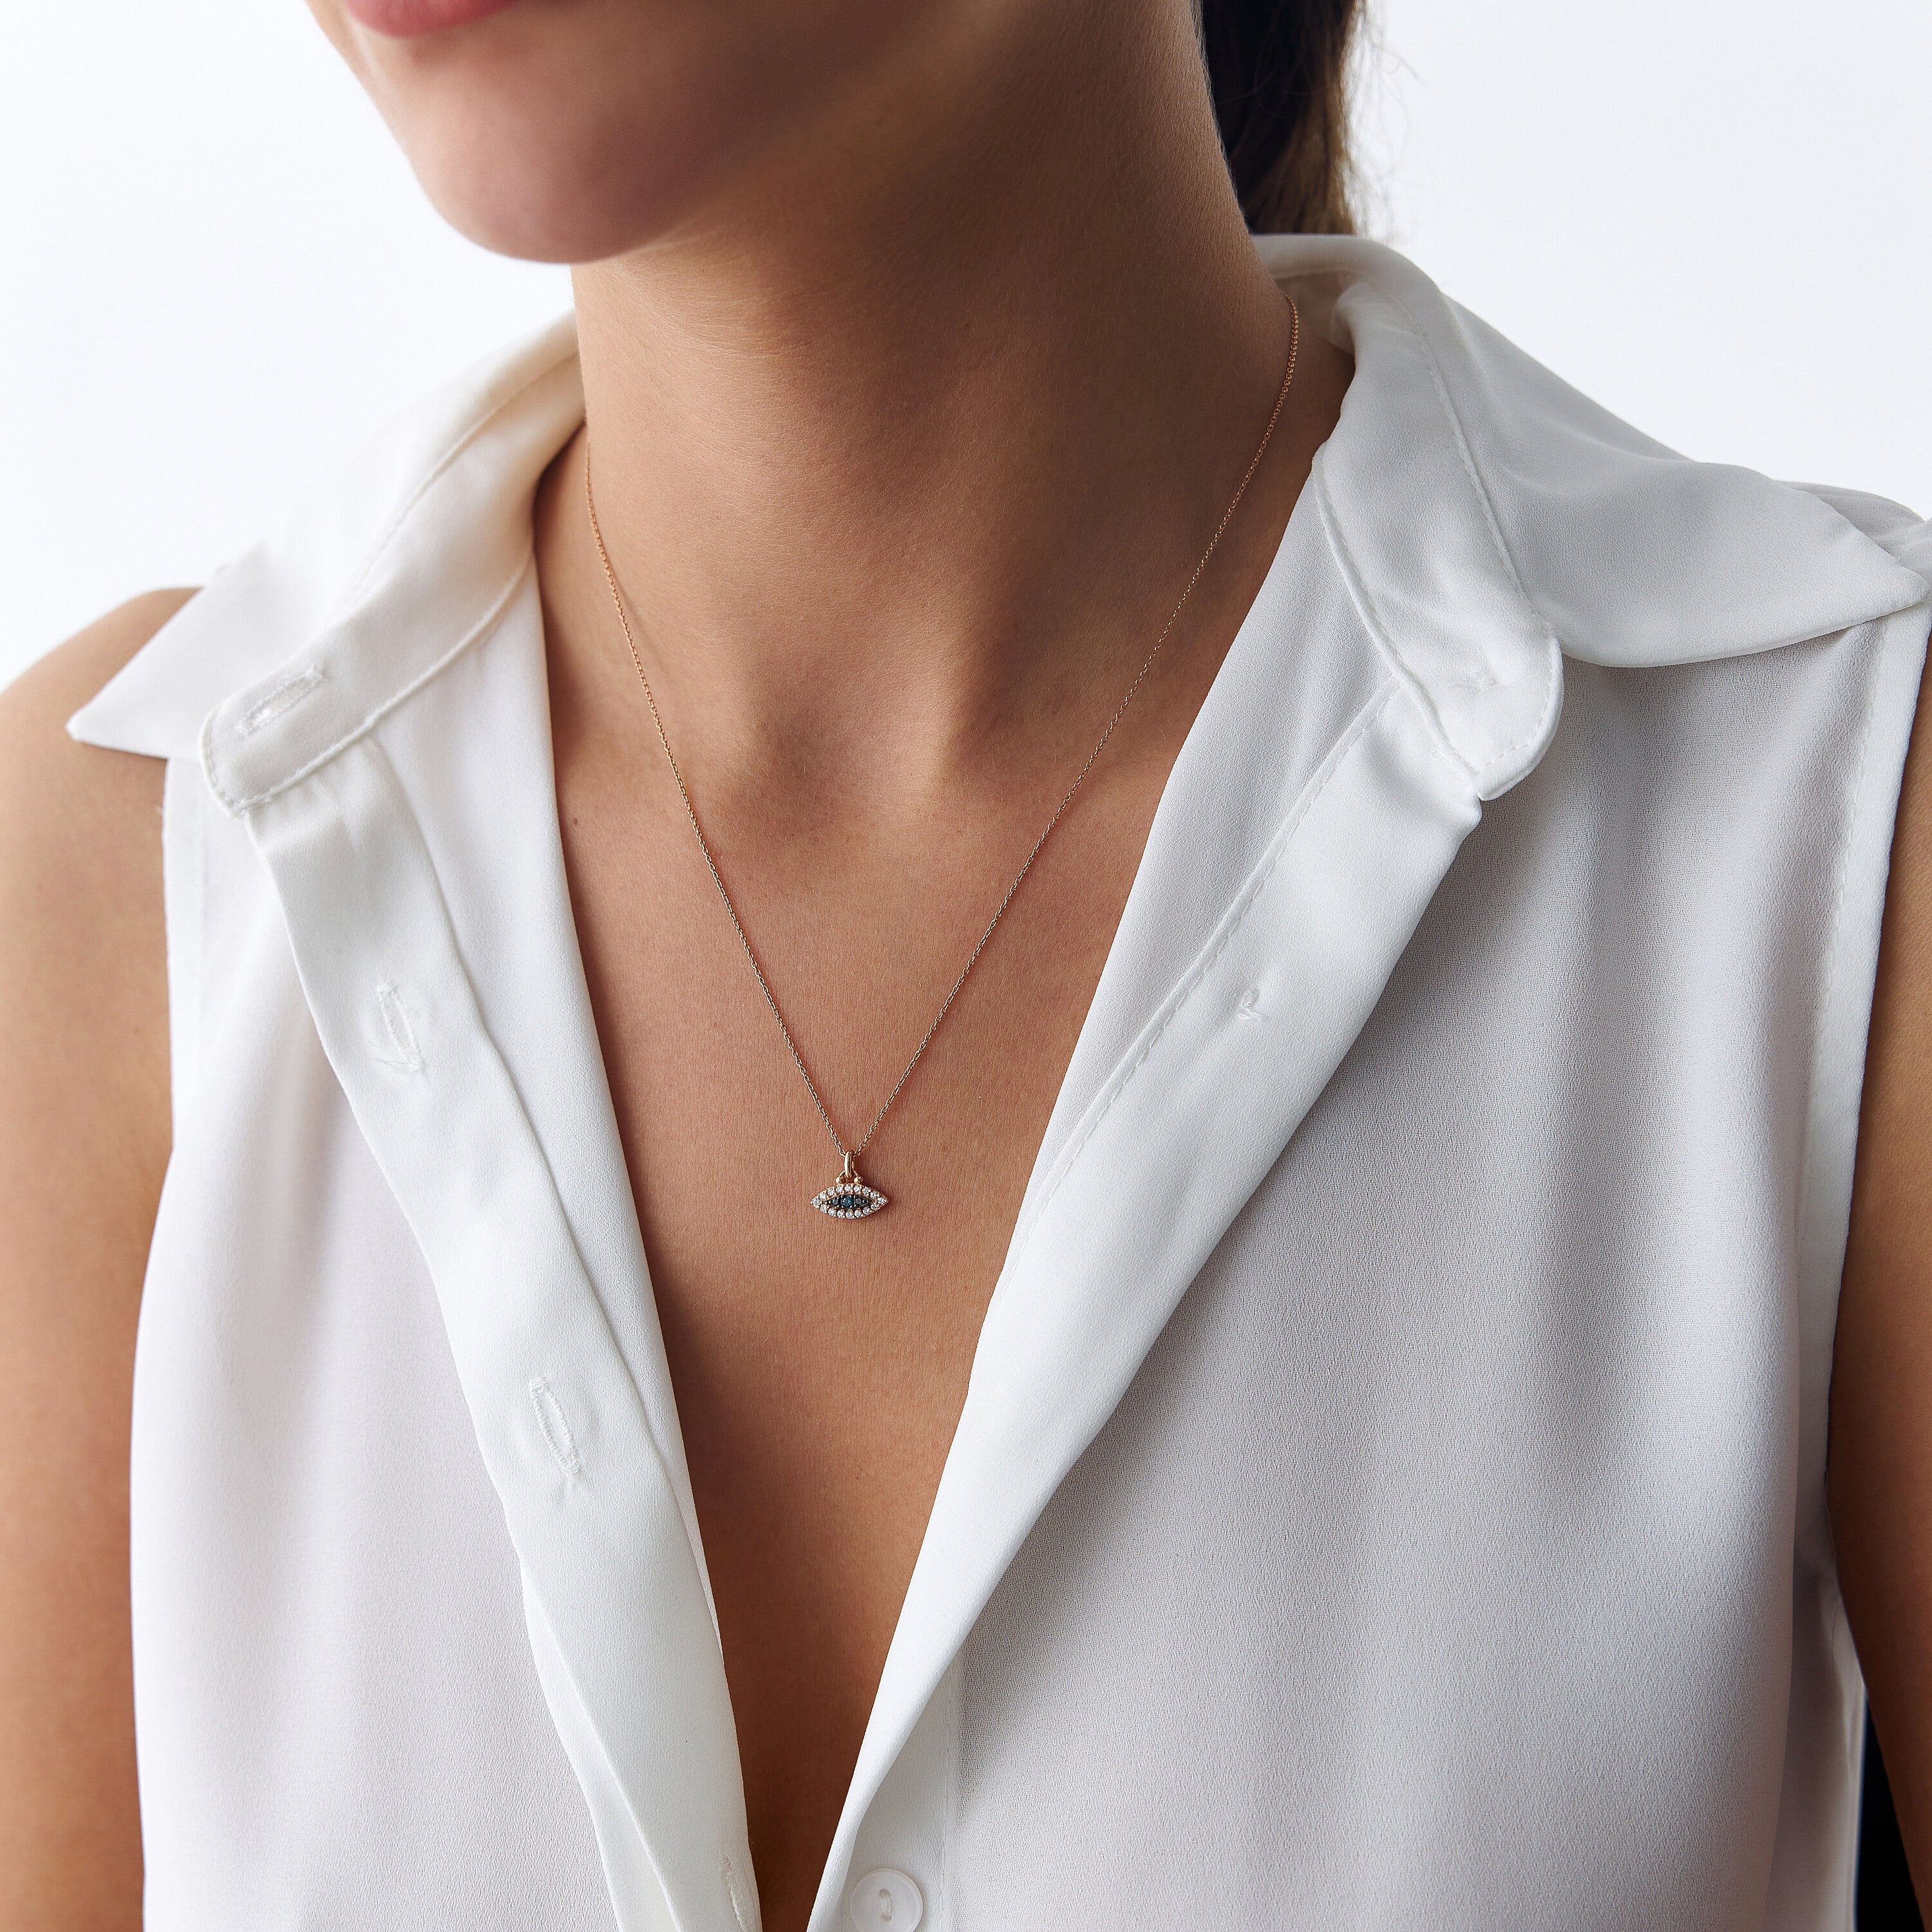 14K Gold Dainty Protection Necklace with Natural White, Blue, and Black Diamonds